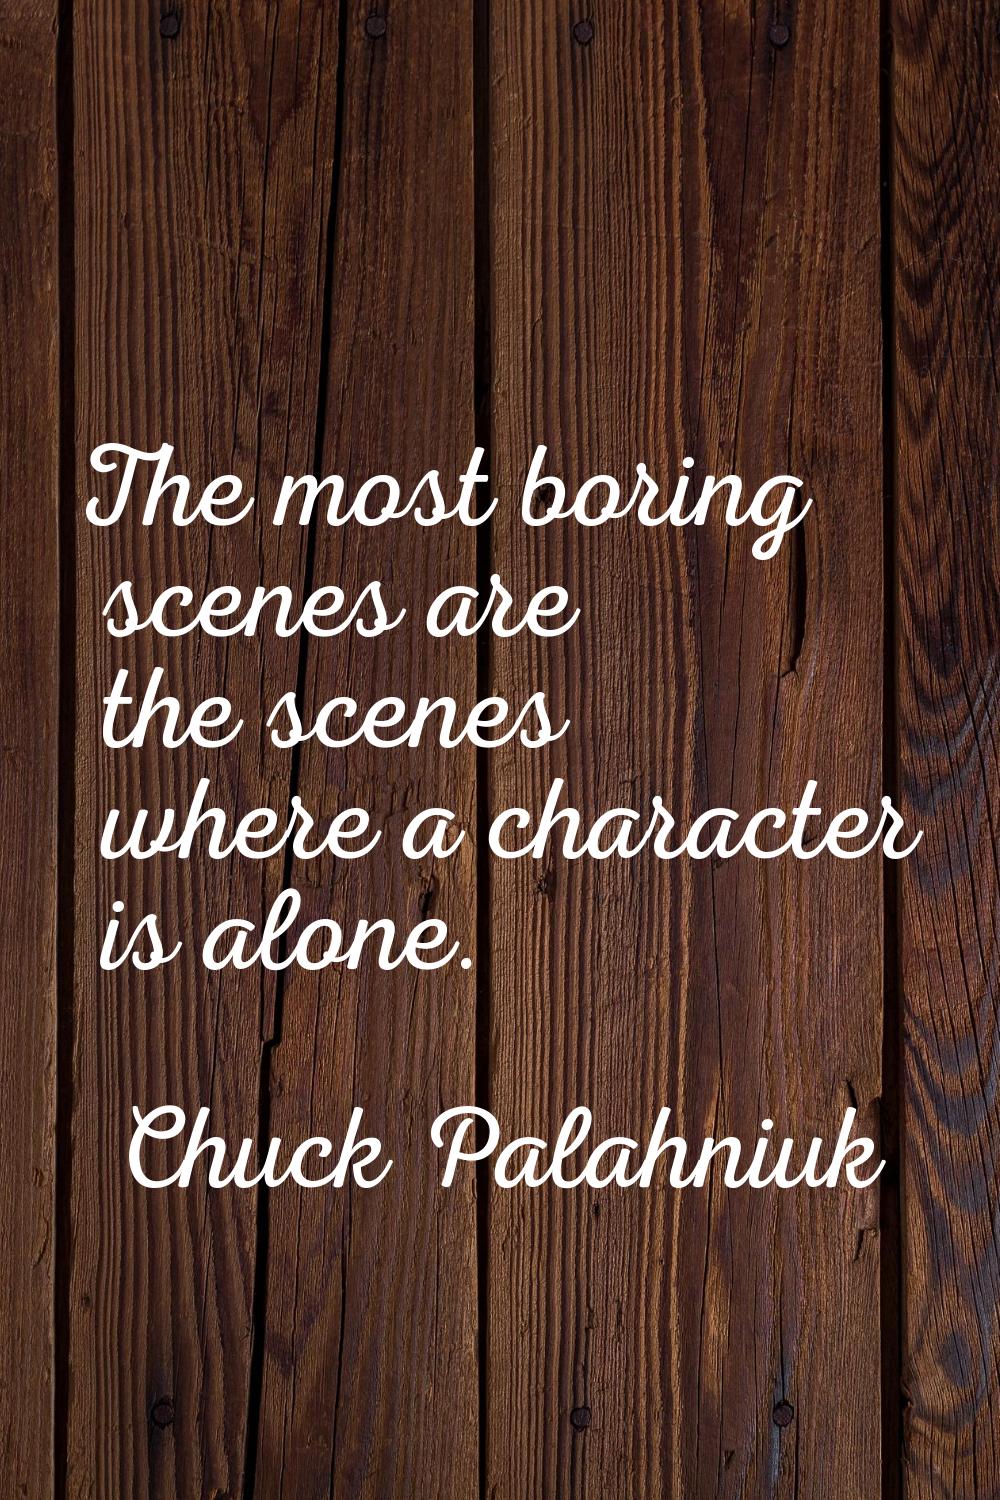 The most boring scenes are the scenes where a character is alone.